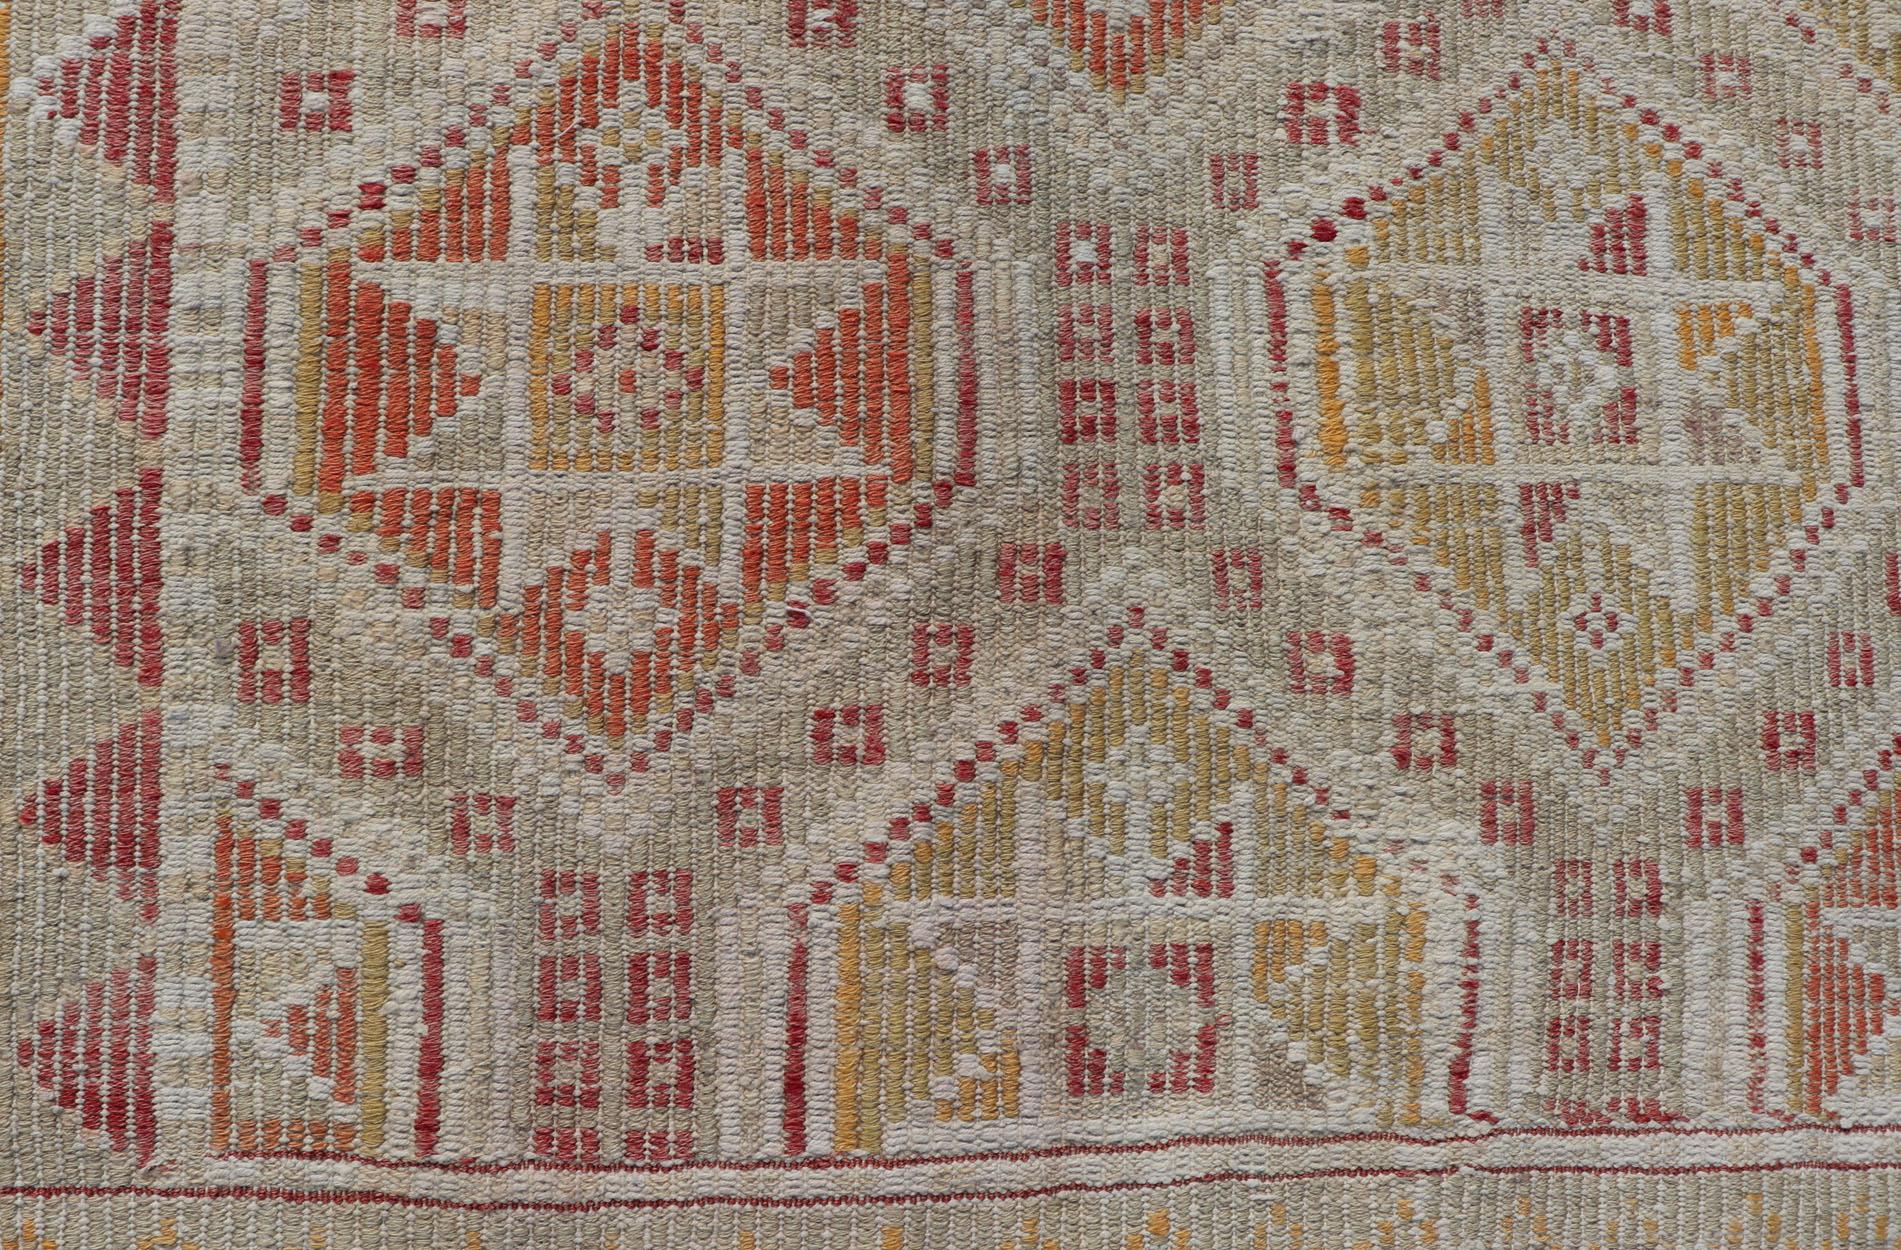 Hand-Woven Turkish Vintage Kilim with All-Over Diamond Design With Orange & Yellow For Sale